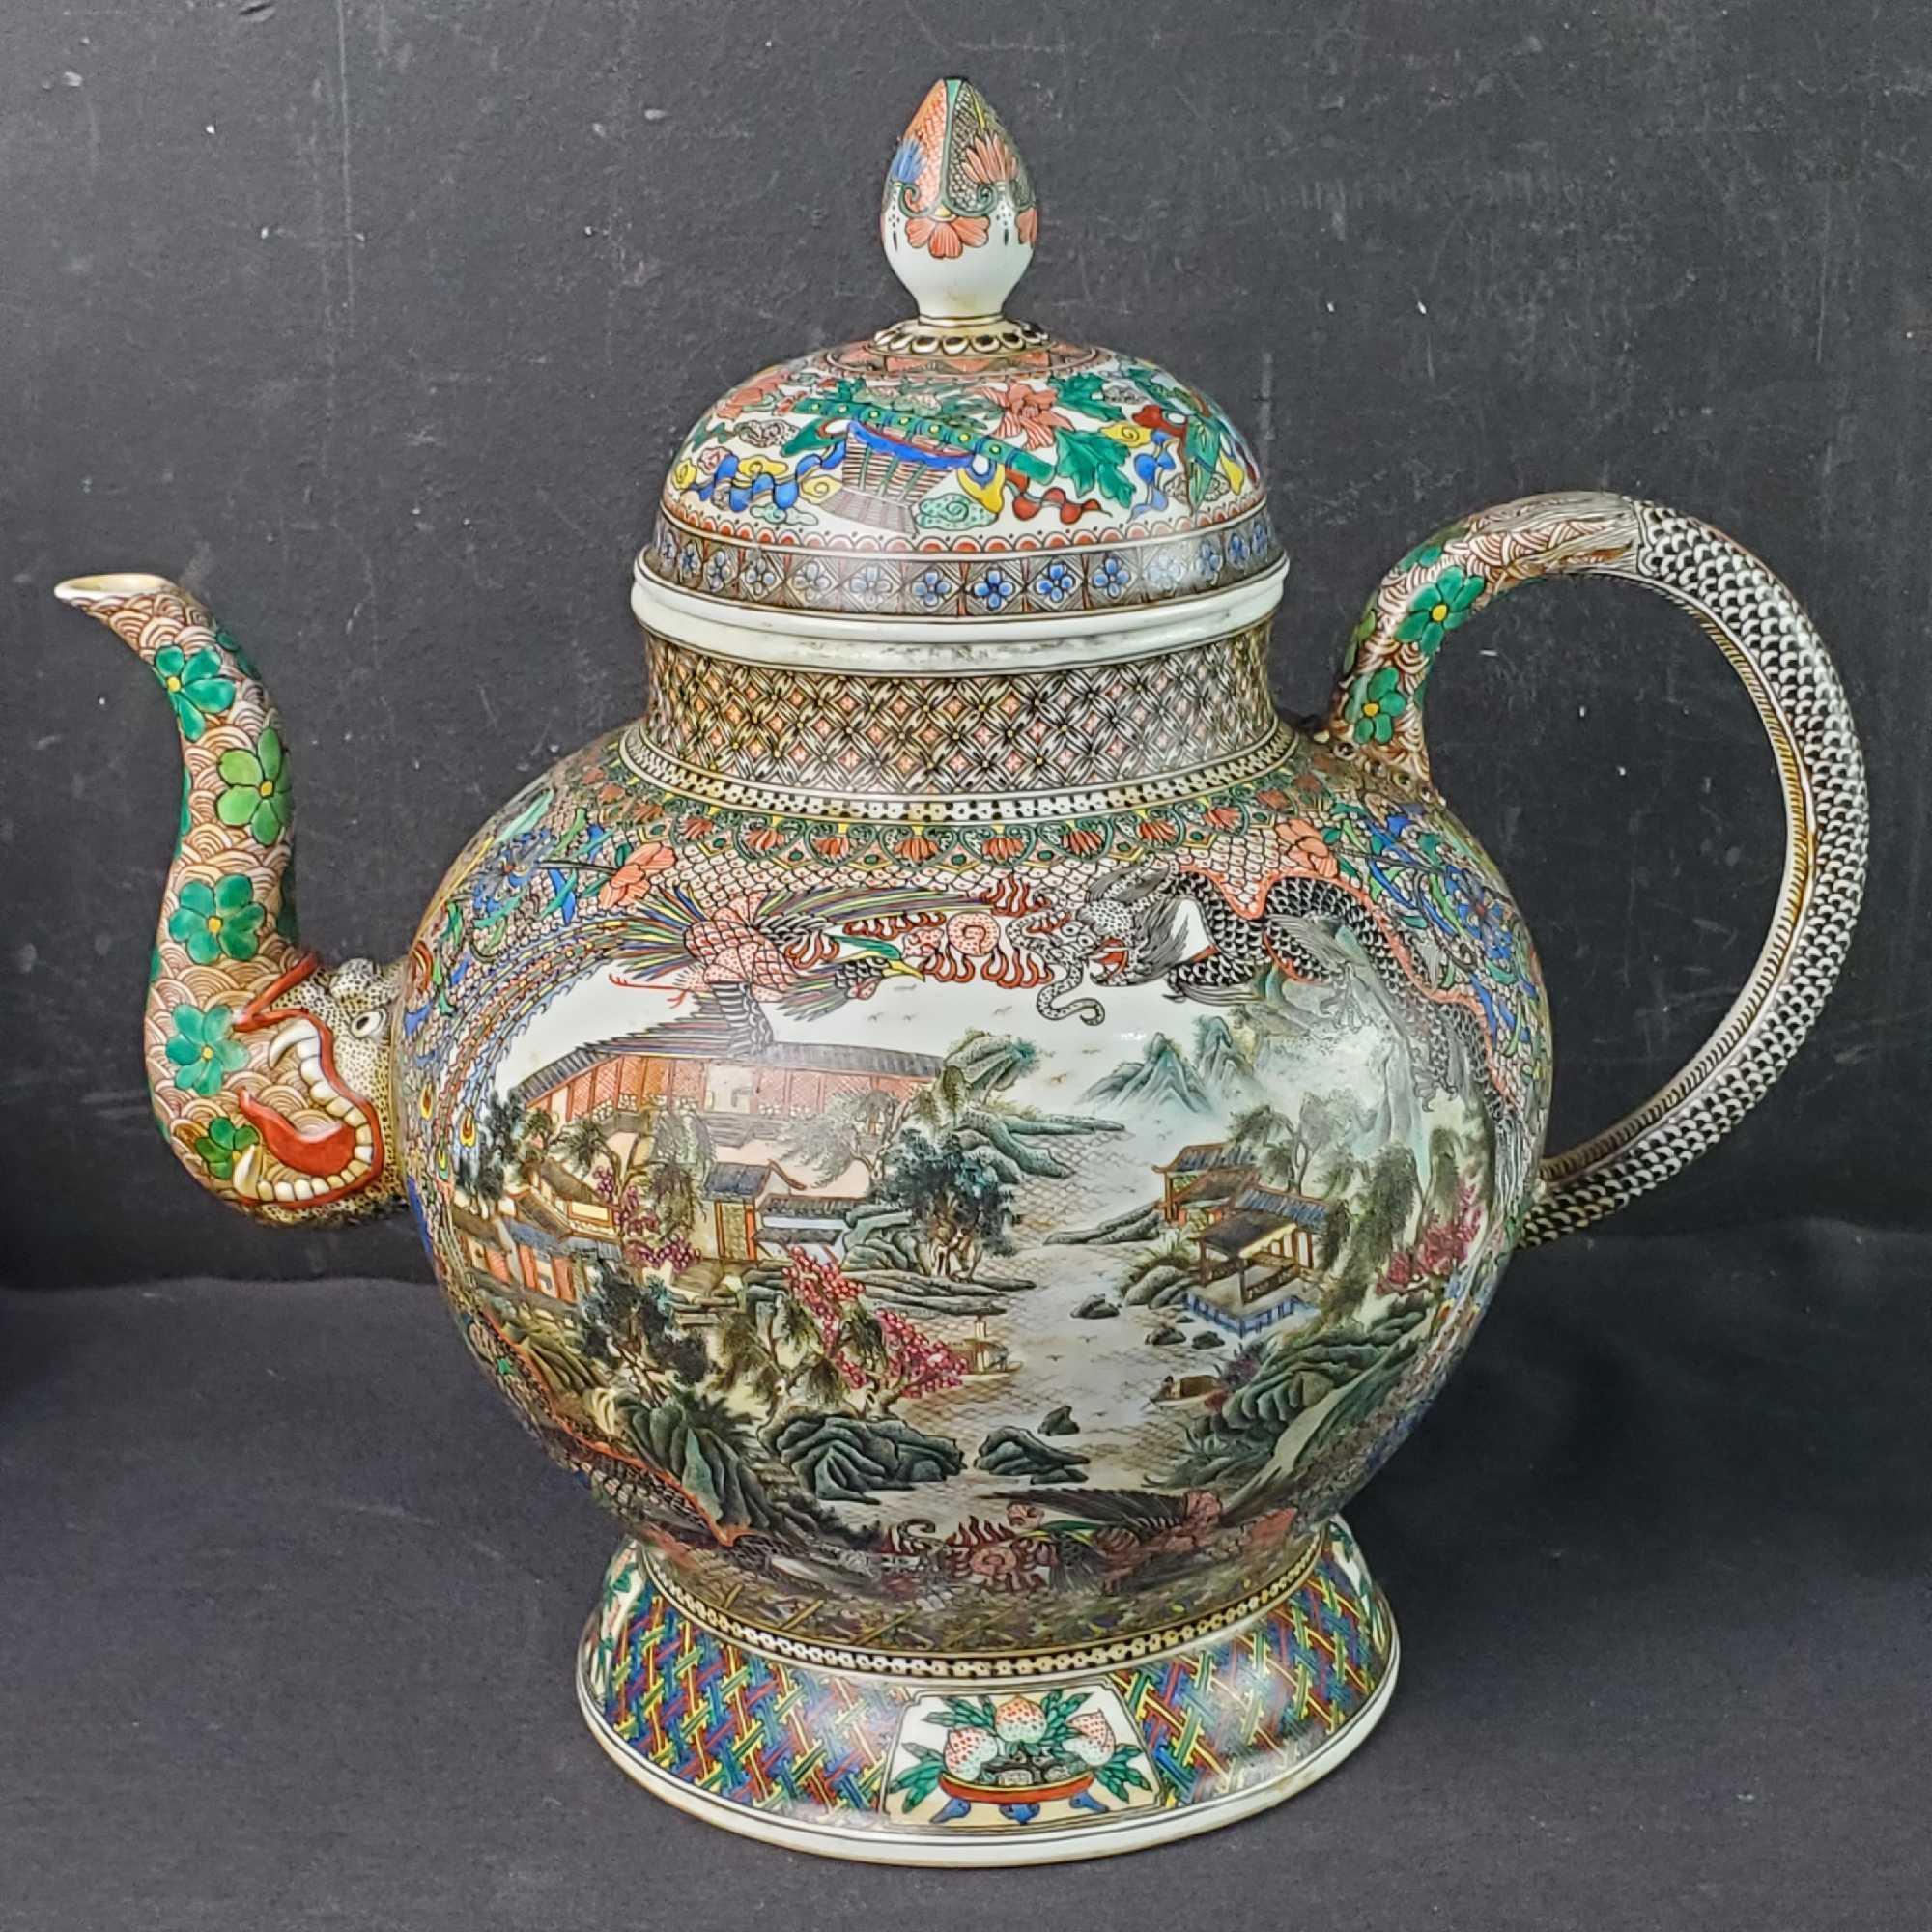 Large Chinese hand painted porcelain teapot 2 Herend Hungary hand painted candle holders floral vase